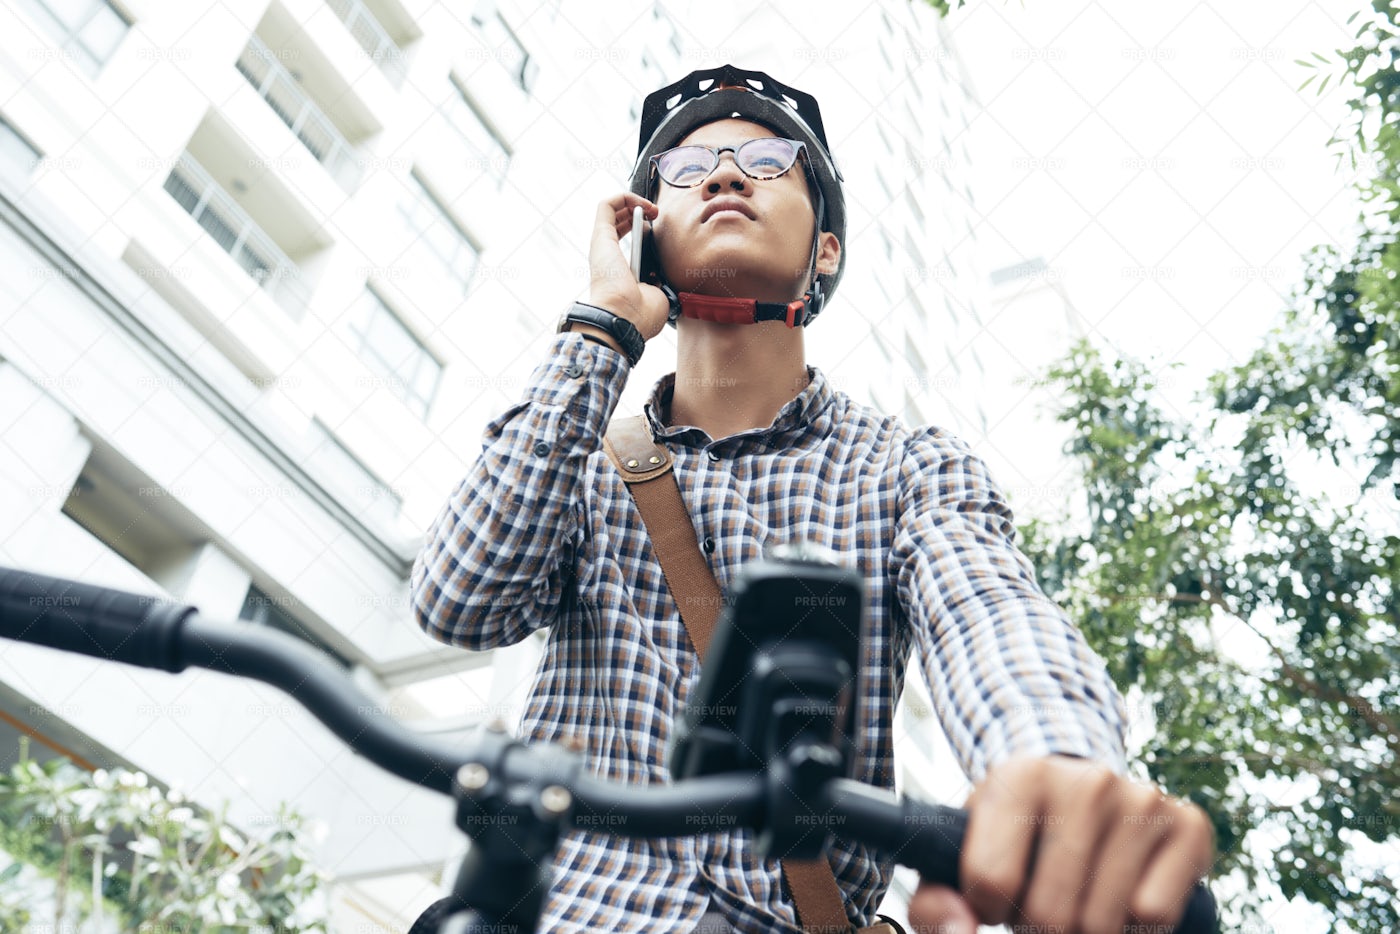 Cyclist Using Mobile Phone: Stock Photos